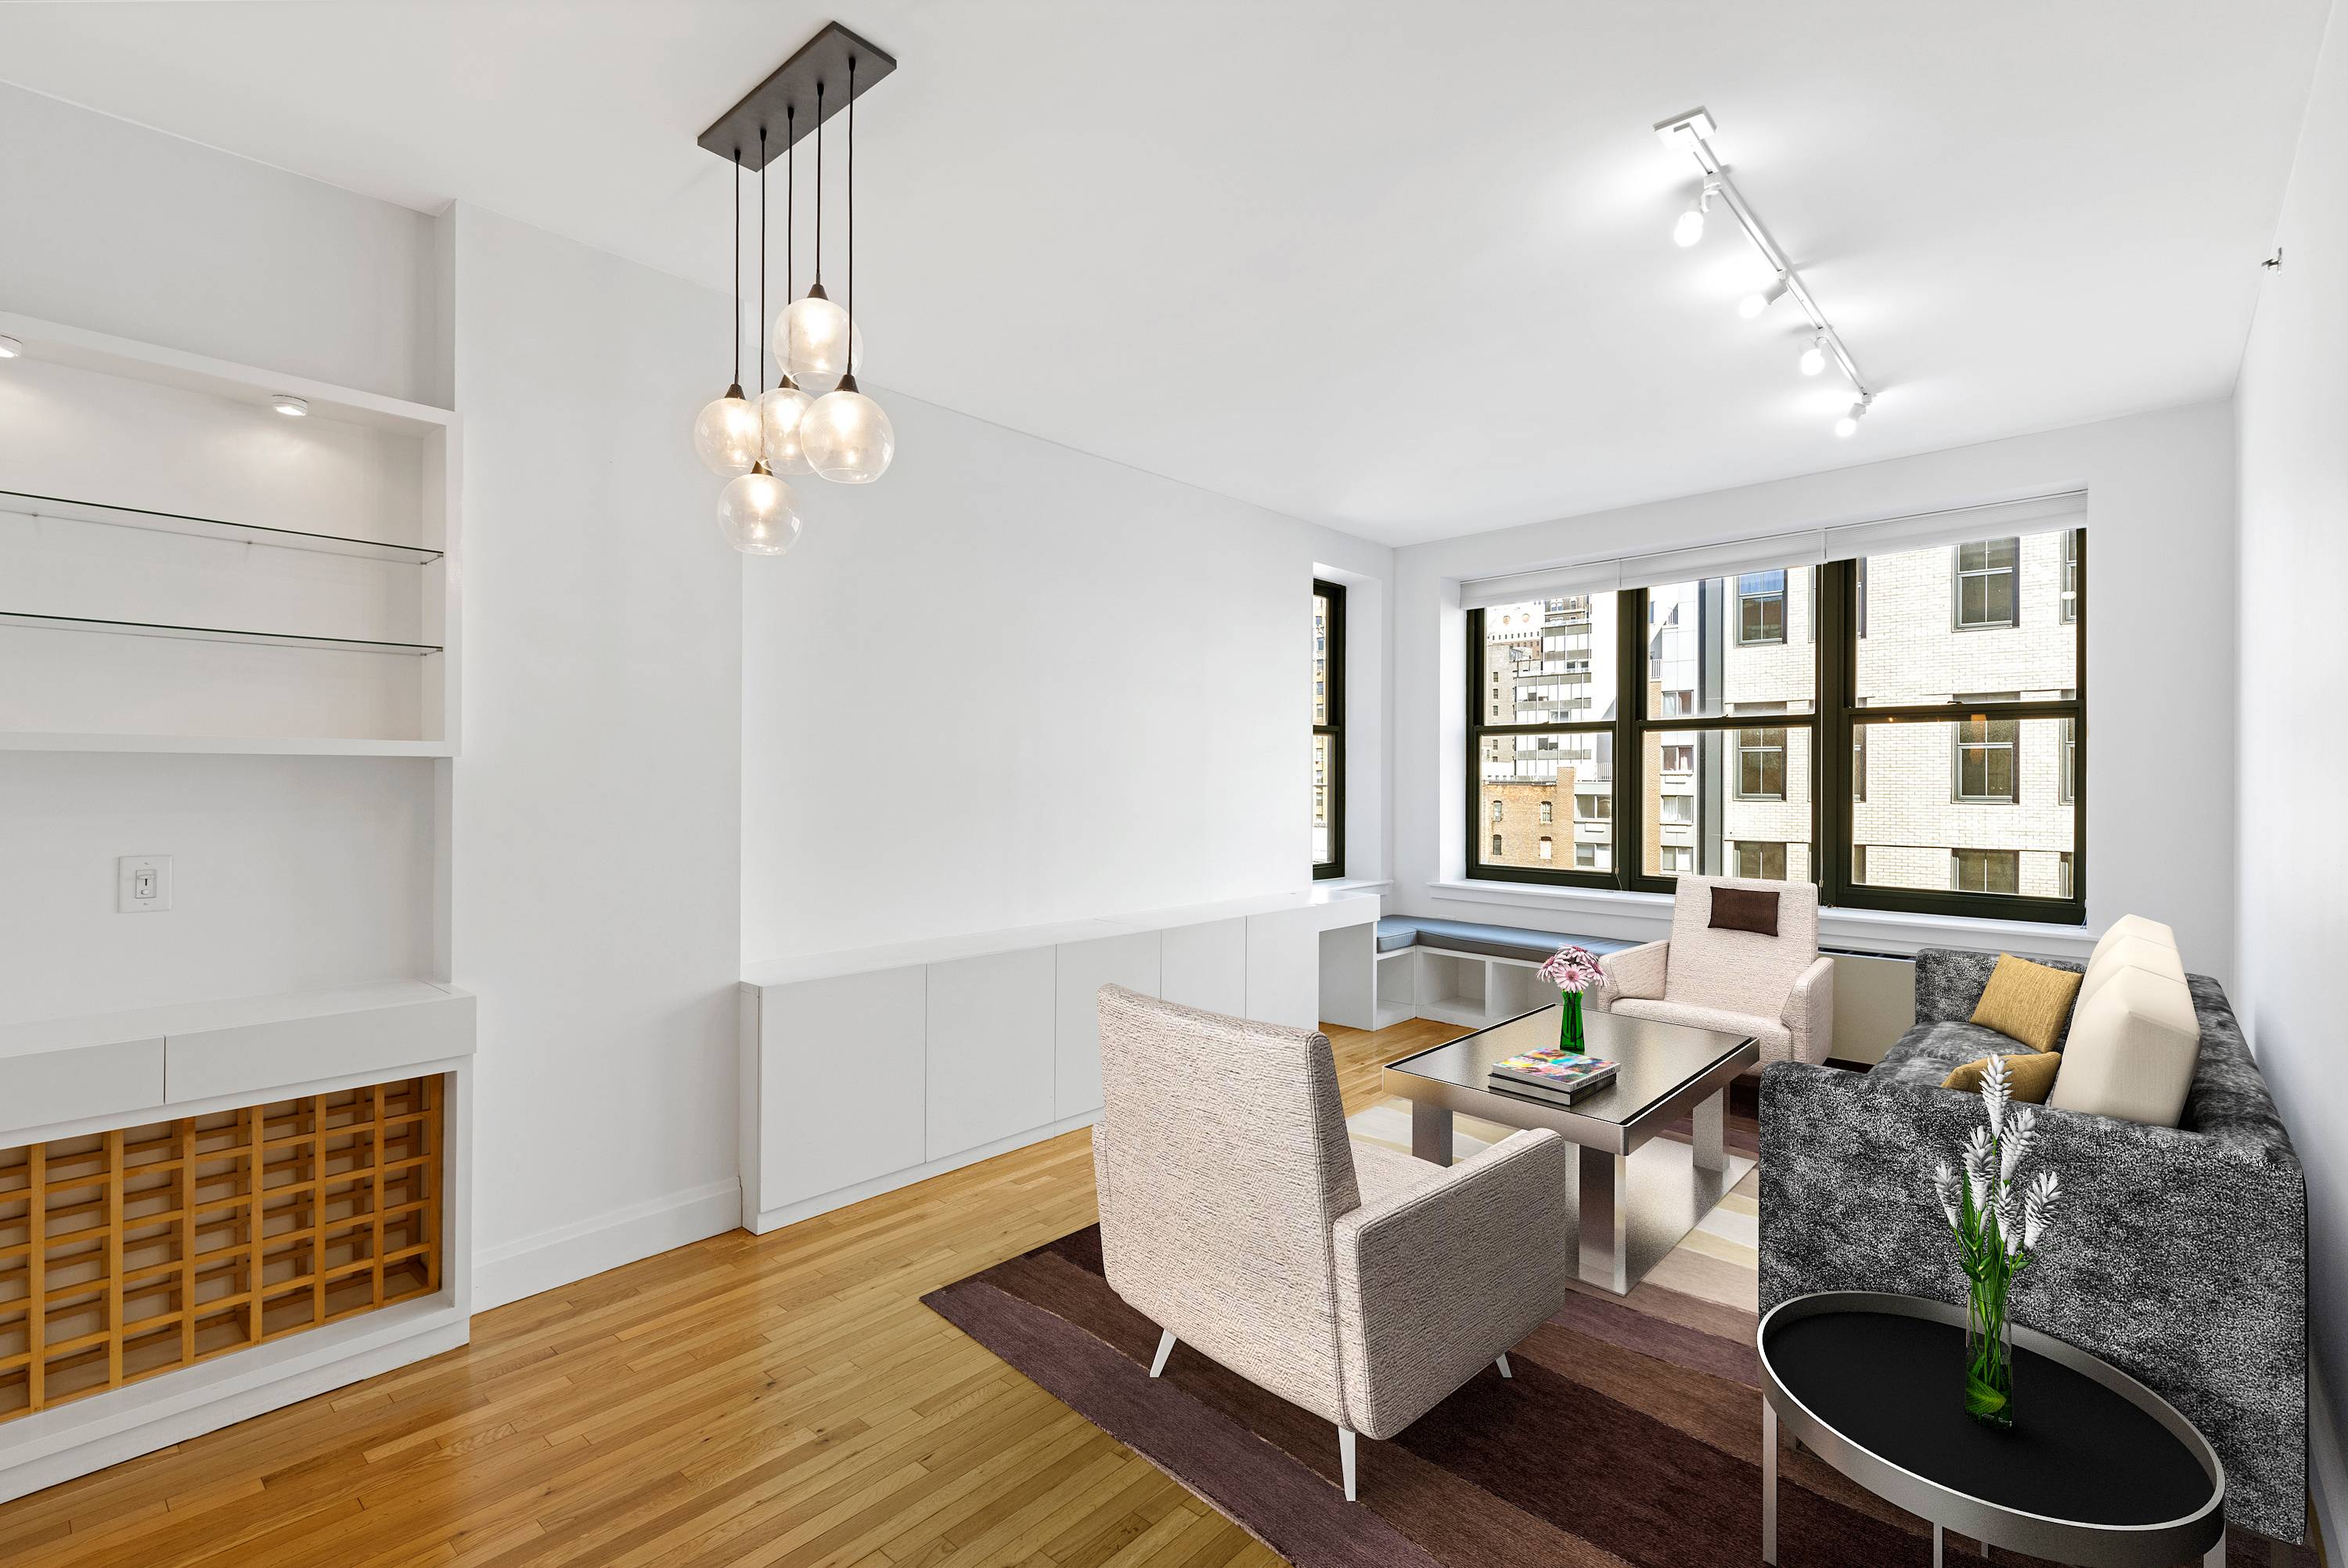 State of the art condo situated at the crossroads of Brooklyn Heights, Downtown Brooklyn and Cobble Hill, near all of the shopping, bars and restaurants on Atlantic Avenue, Smith Street, ...